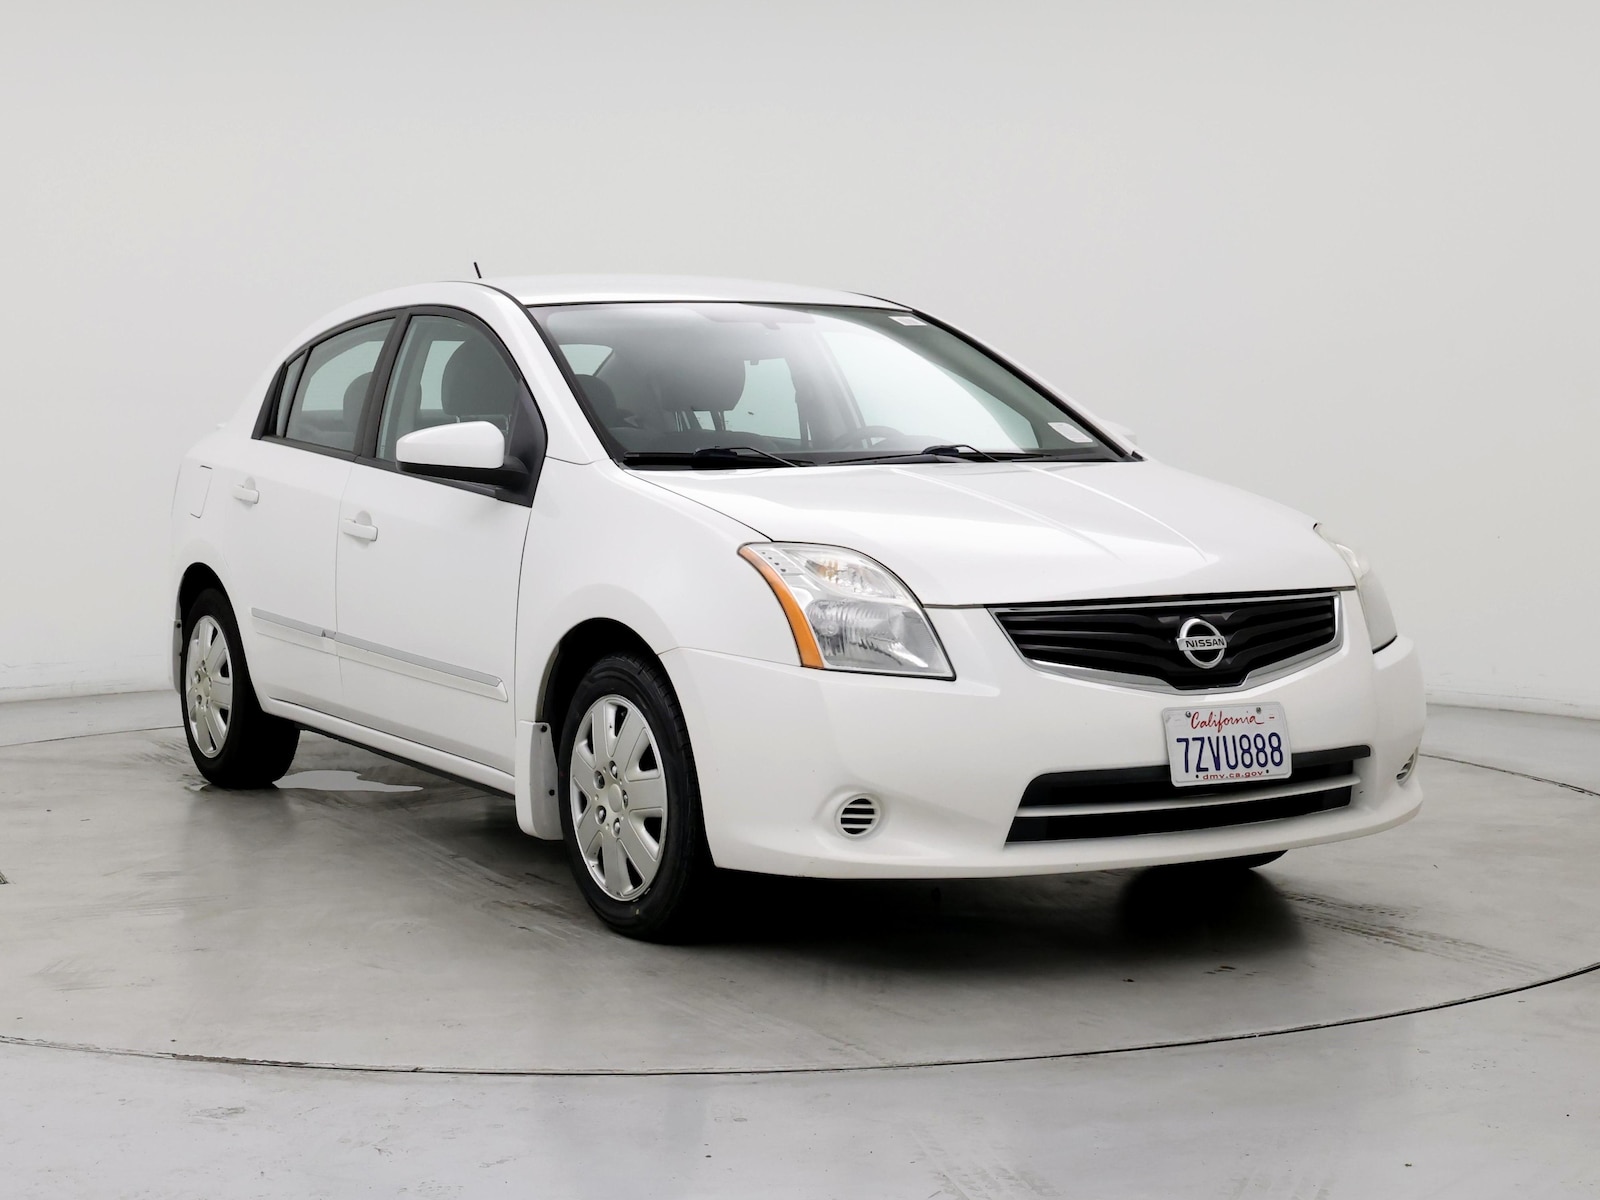 Used 2012 Nissan Sentra S with VIN 3N1AB6AP4CL704192 for sale in Spokane Valley, WA